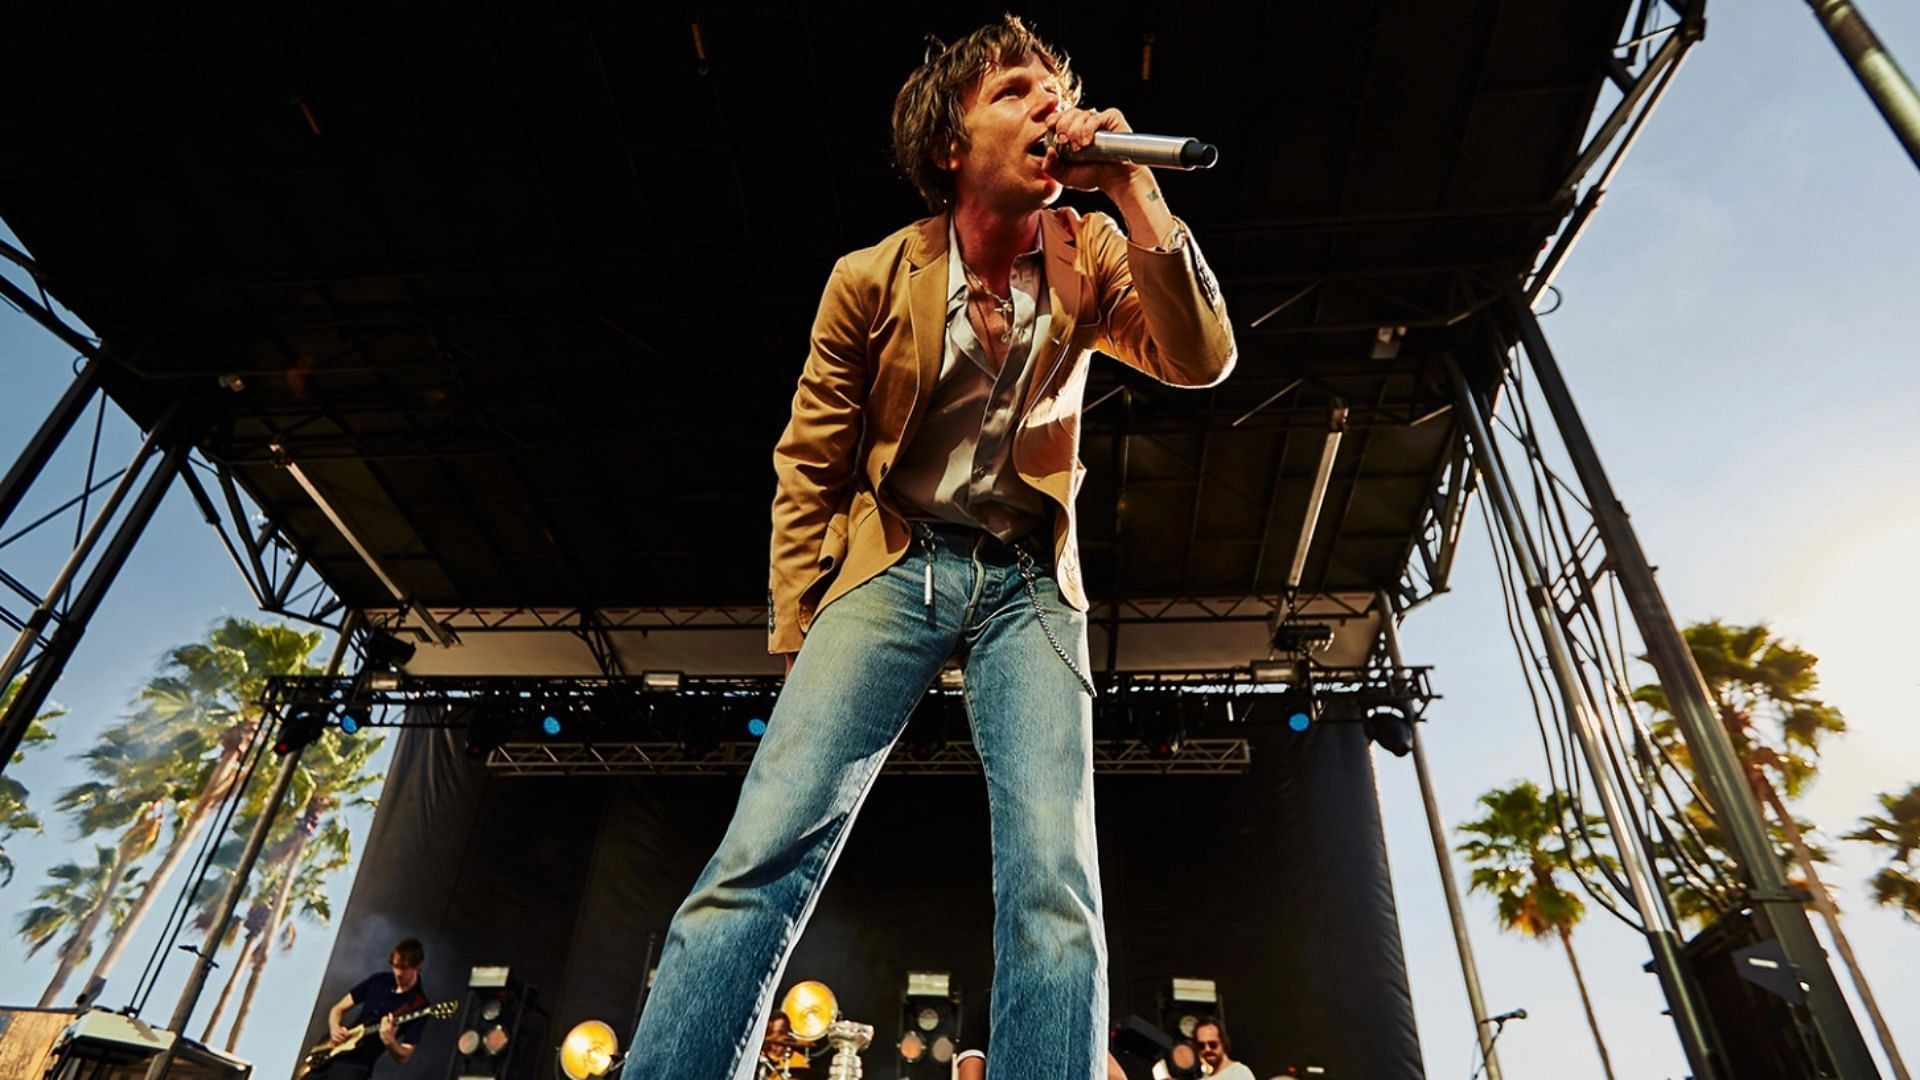 Matt Shultz was arrested for carrying weapons in public. (Image via Getty)